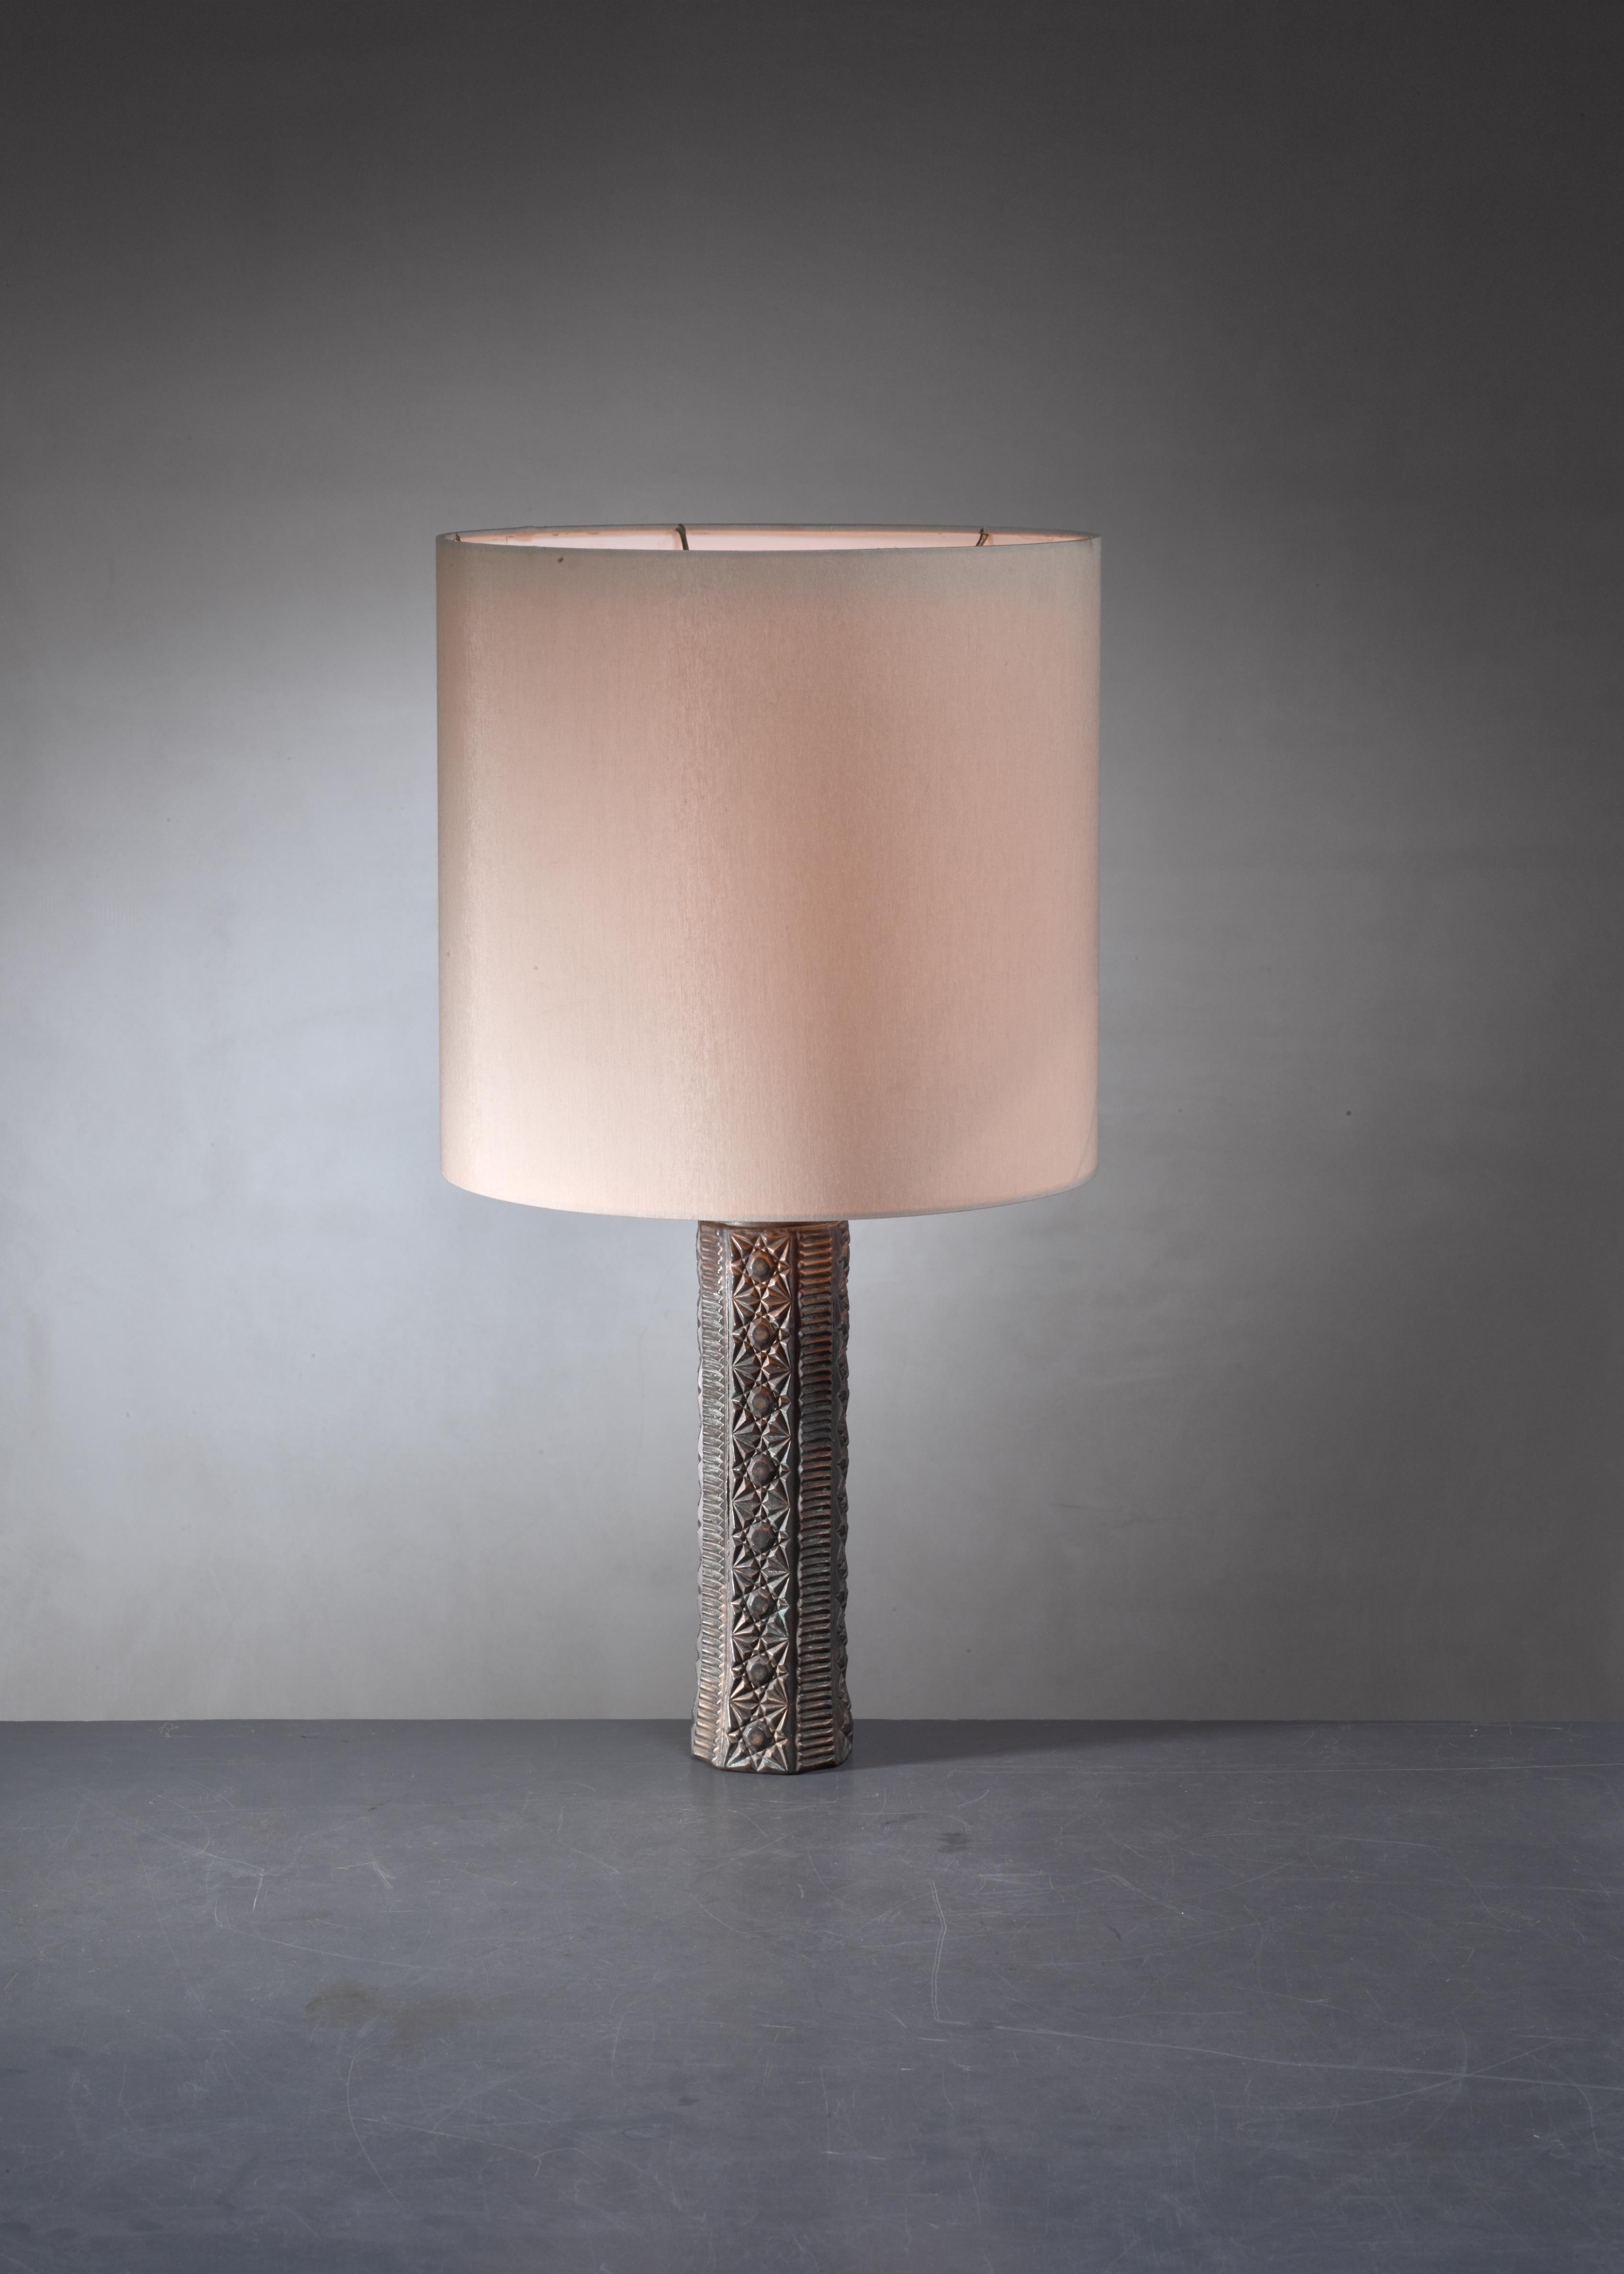 A Mid-Century bronze sculptural table lamp from France, in the manner of Angelo Brotto.

The measurements without the fabric shade are a diameter of 7.5 cm and 33 cm high. With the shade it is 57 cm high and the diameter is 30 cm. The shades are